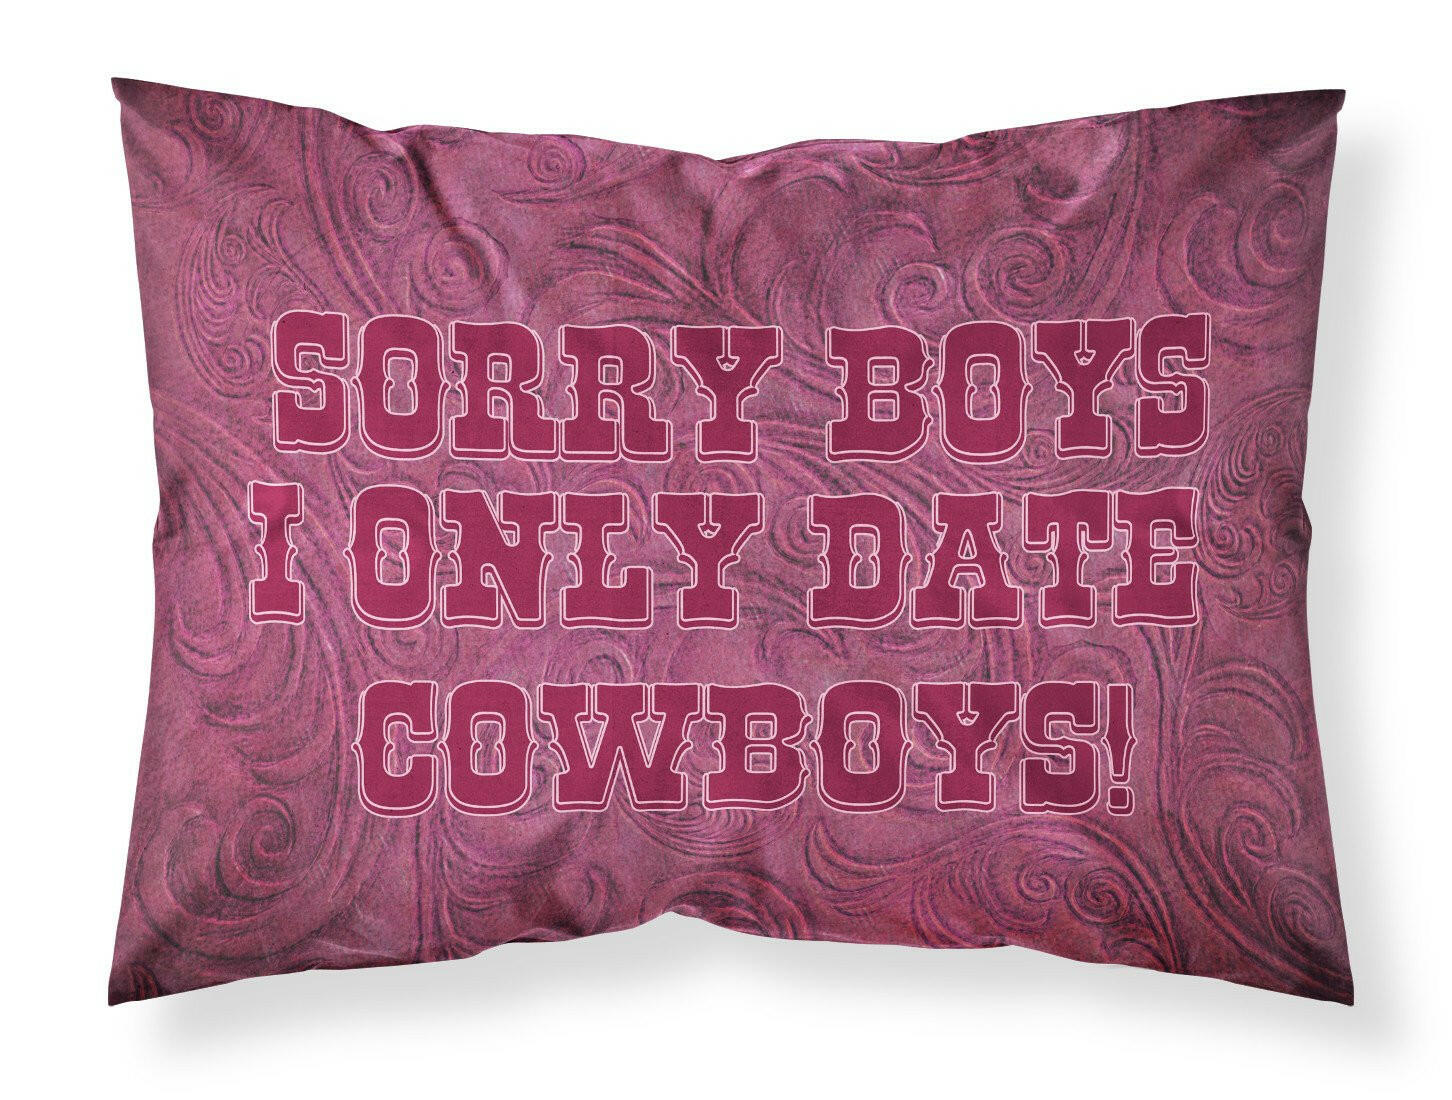 Sorry Boys I only date cowboys in pink Moisture wicking Fabric standard pillowcase SB3062PILLOWCASE by Caroline's Treasures